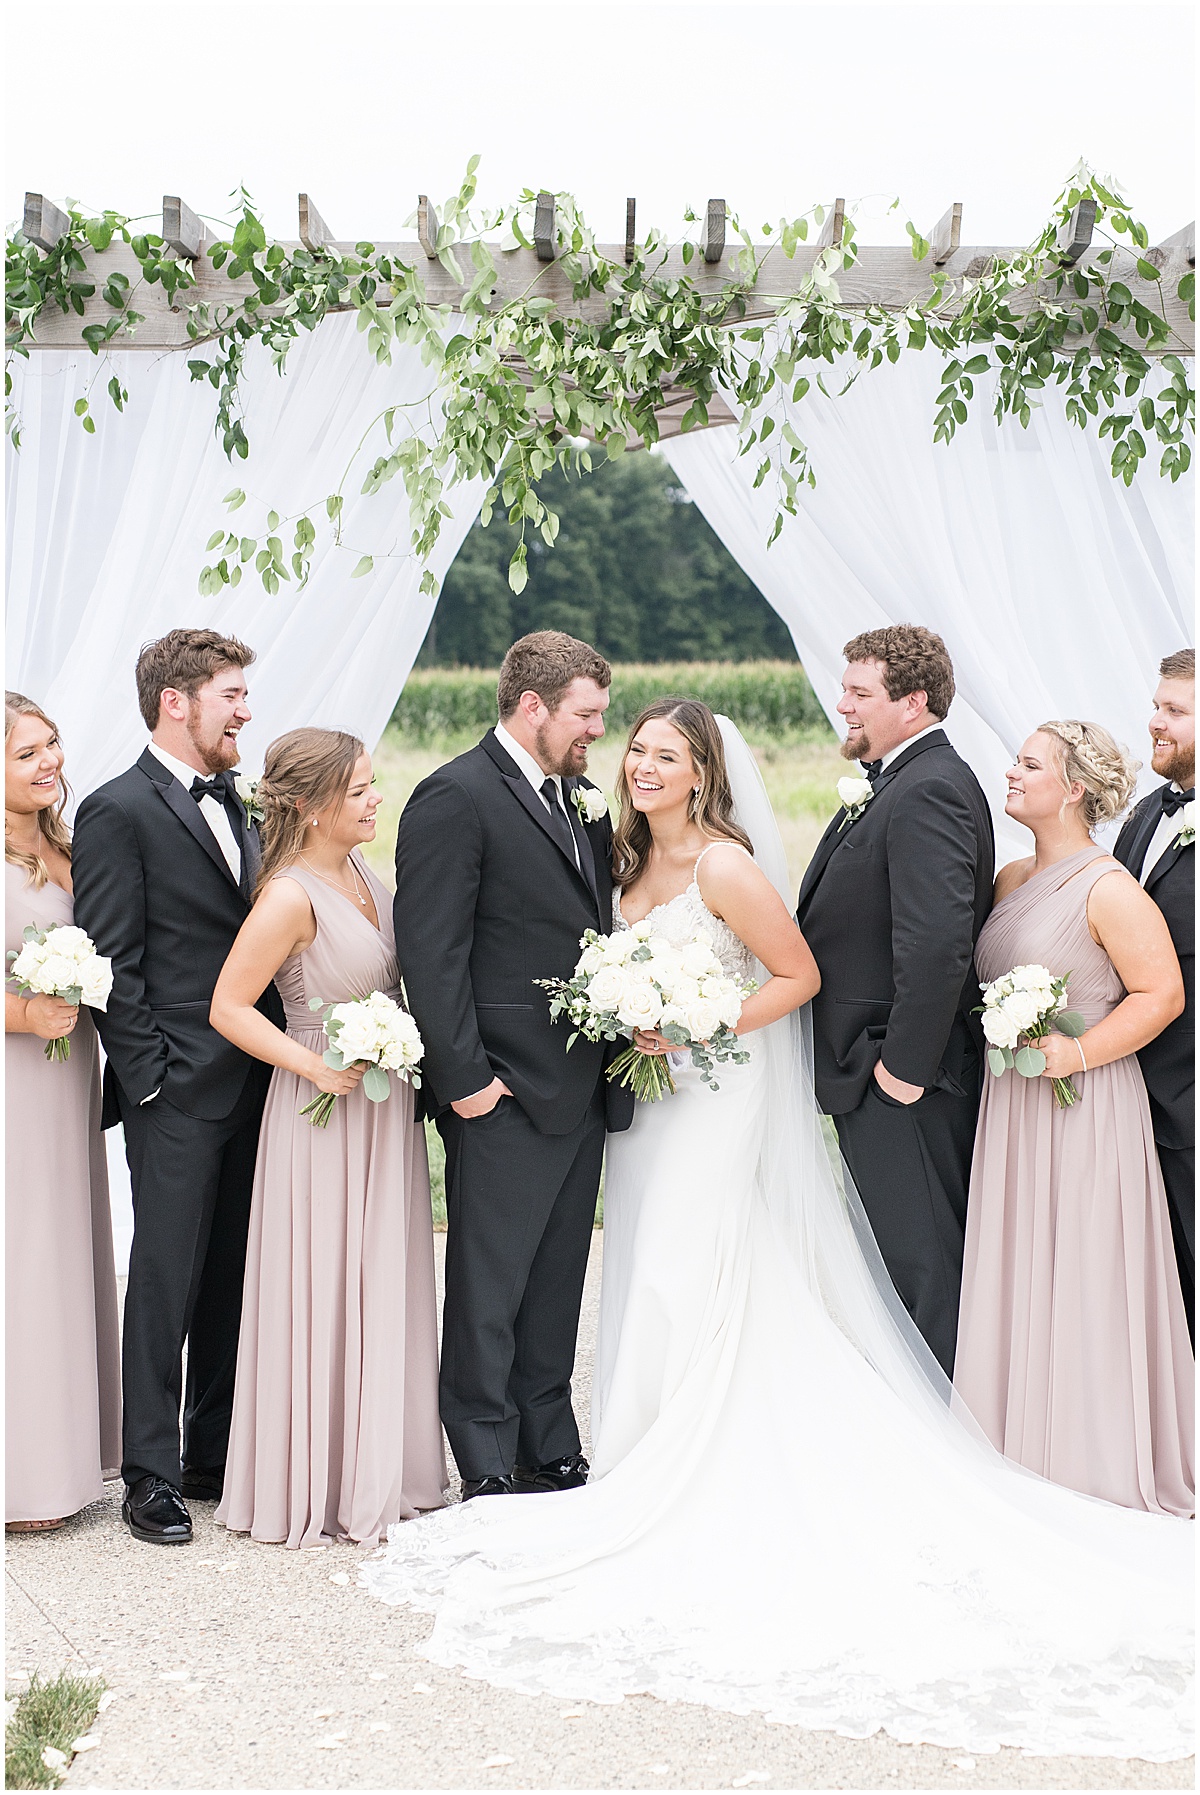 Mr. & Mrs. Hickner: Hawks Point Acres Wedding in Anderson, Indiana